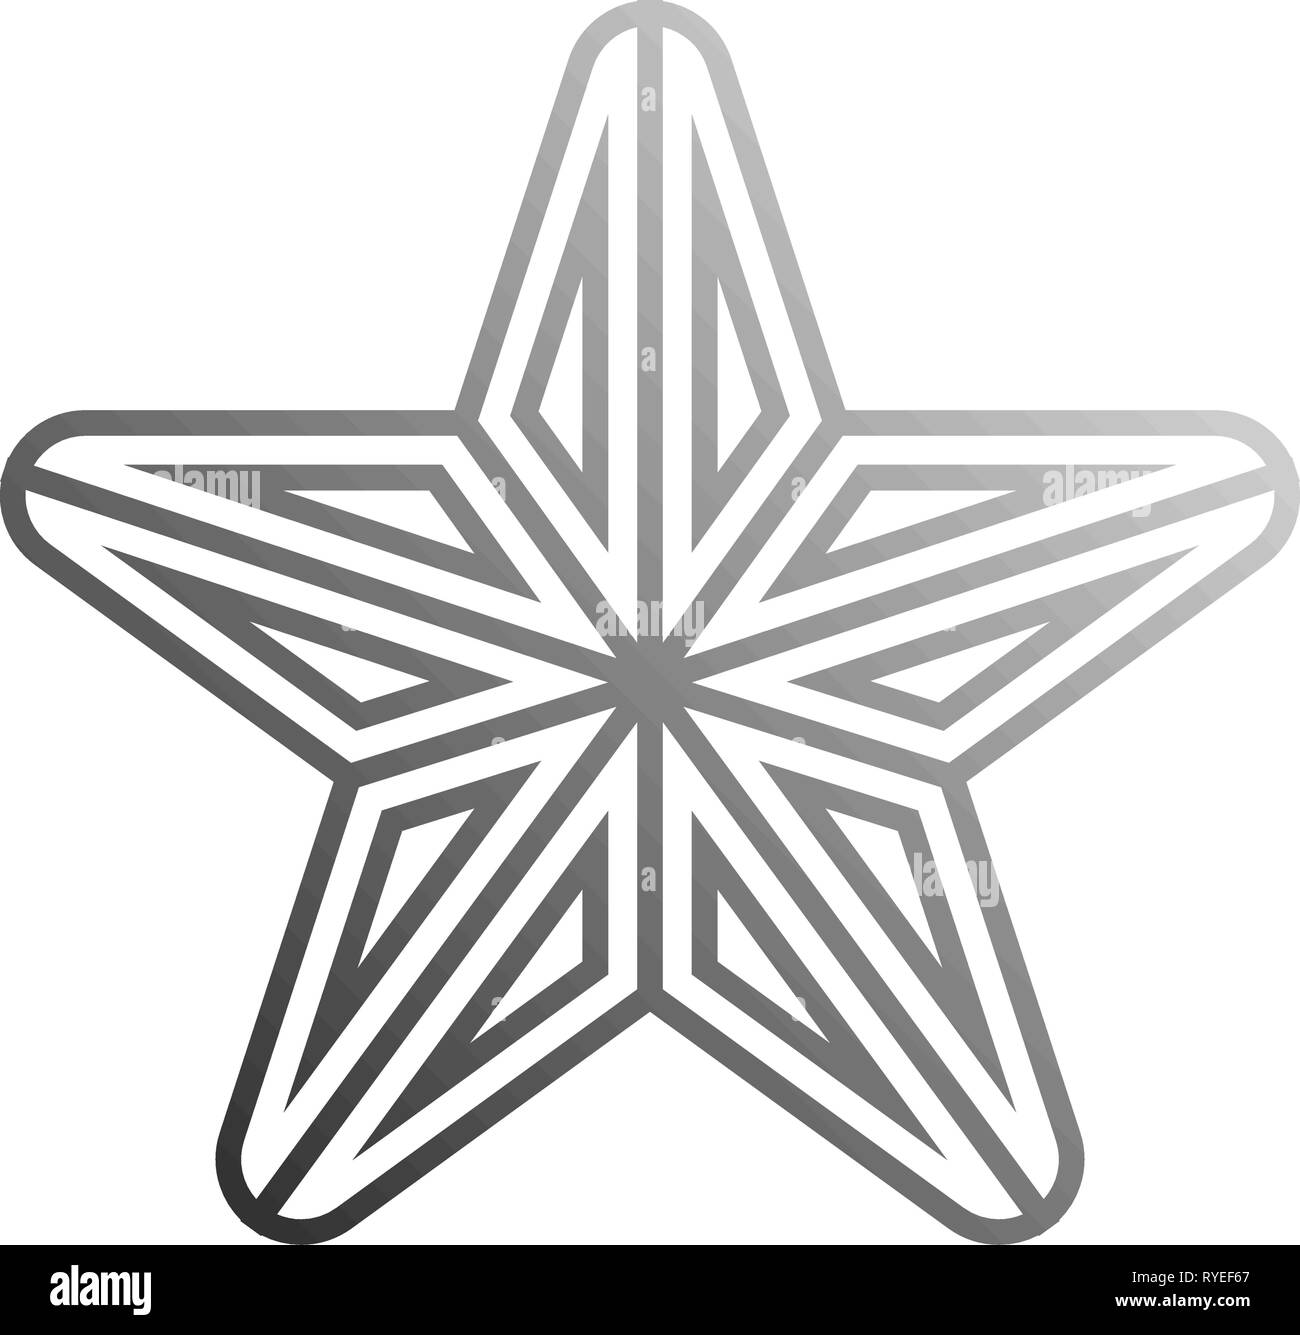 5 point star coloring pages